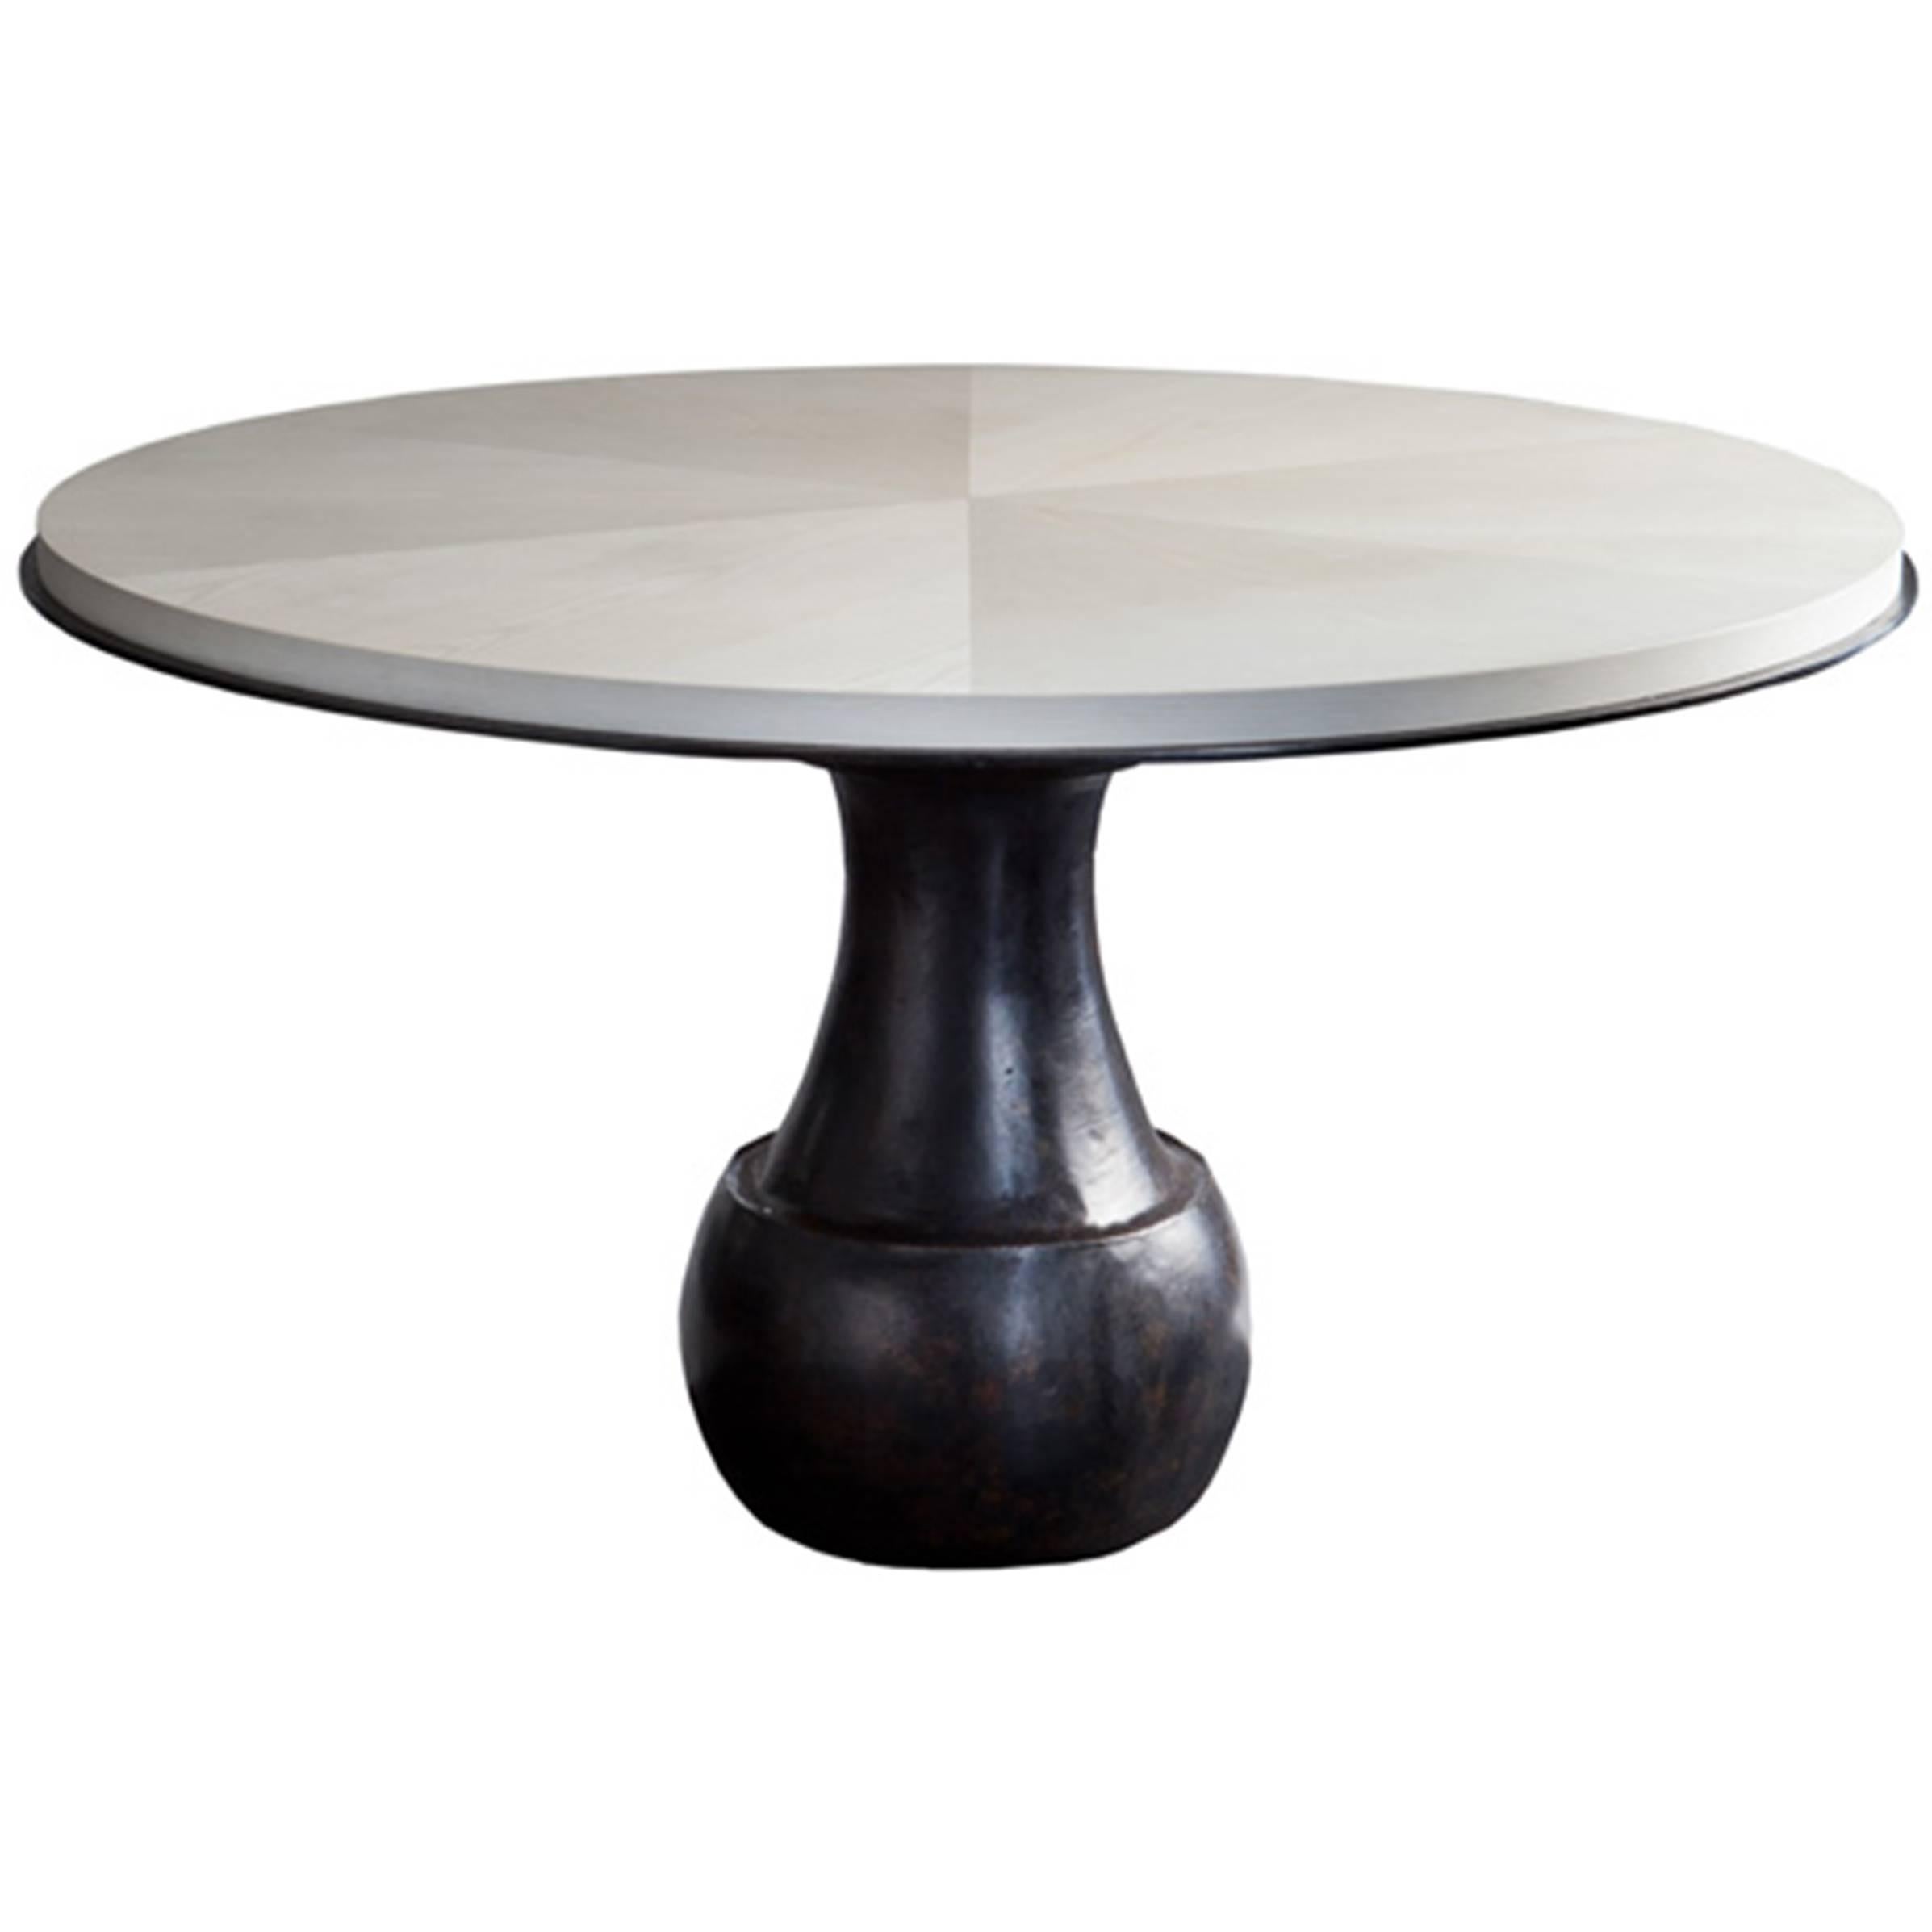 'Carole' by Michel Amar, Paris, Cast Bronze Table with White Birchwood Top For Sale